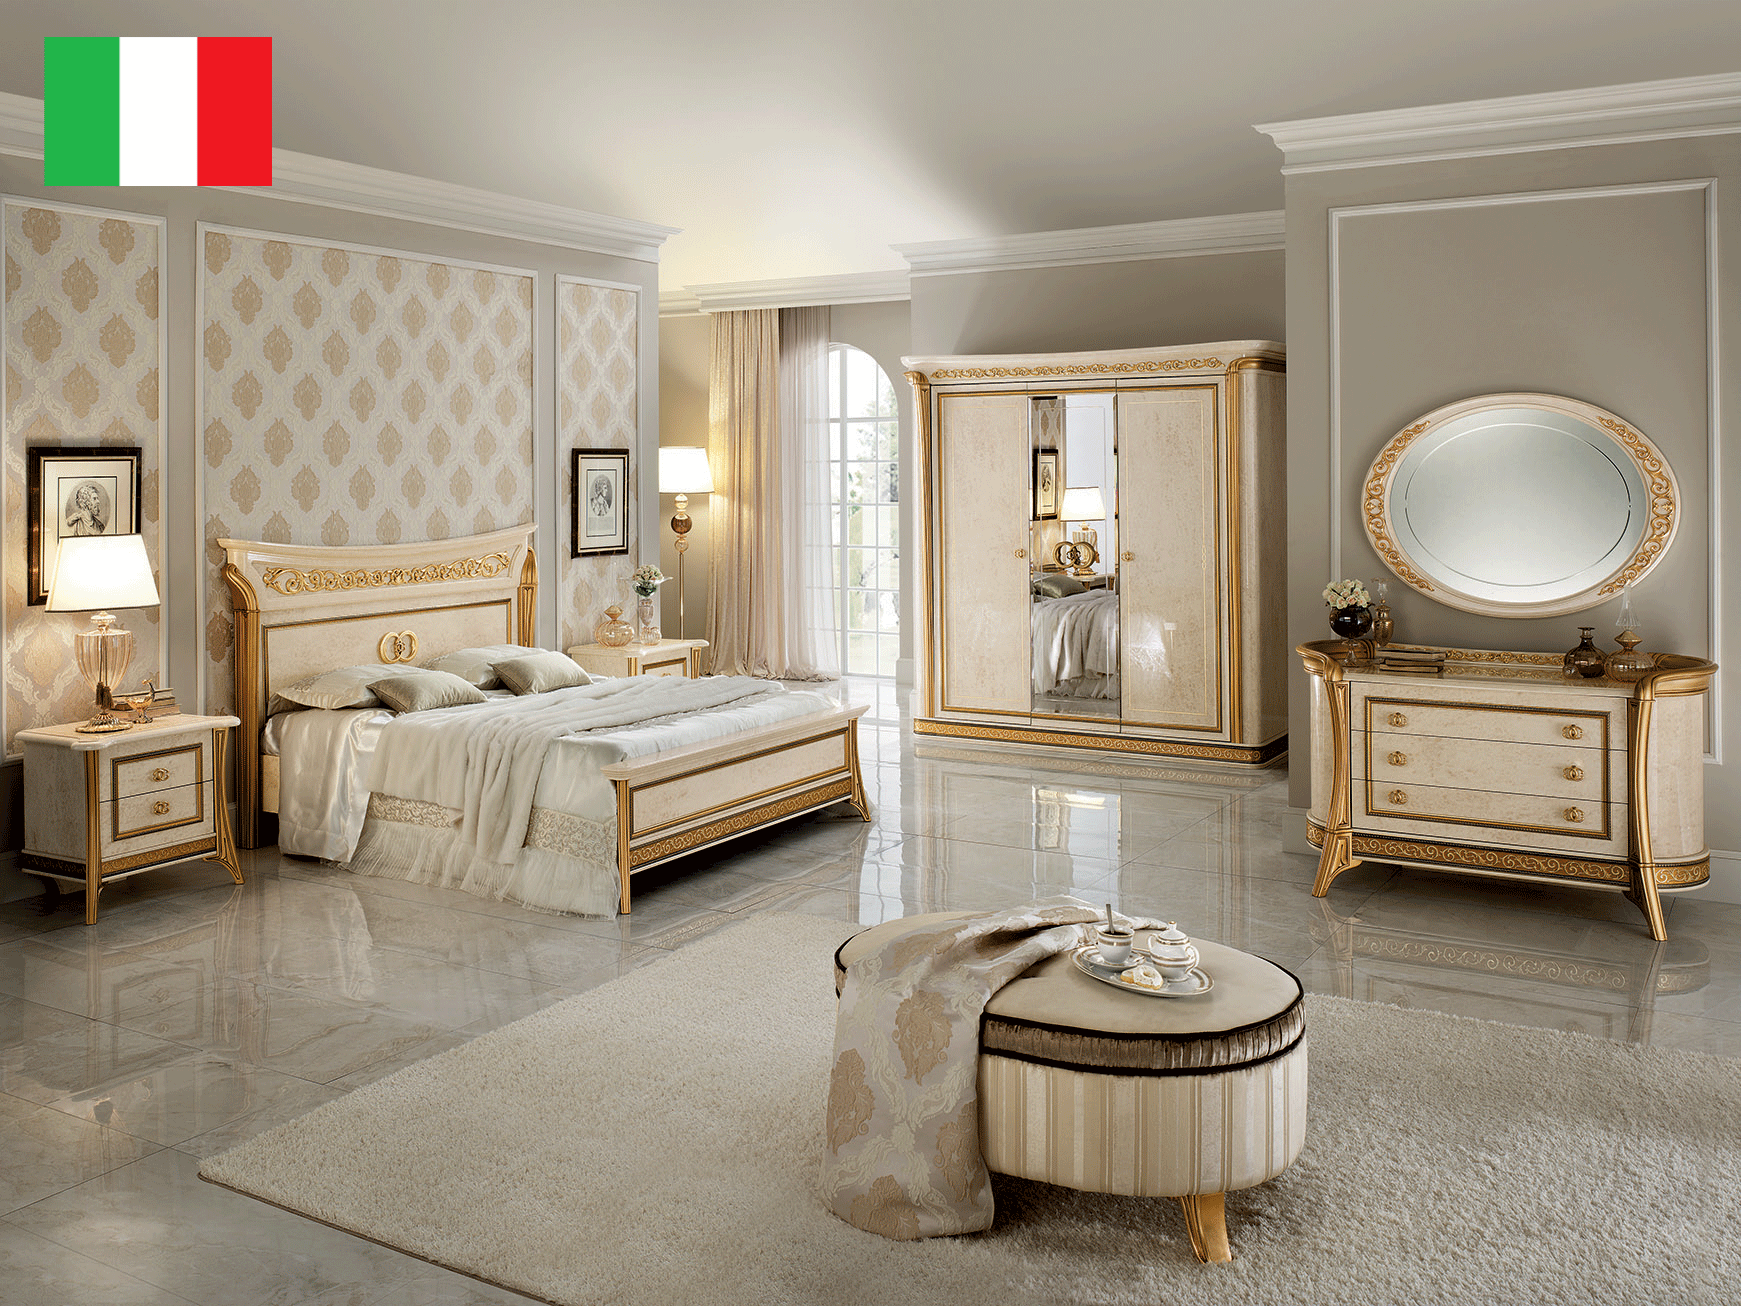 Brands Arredoclassic Dining Room, Italy Melodia Night Bedroom